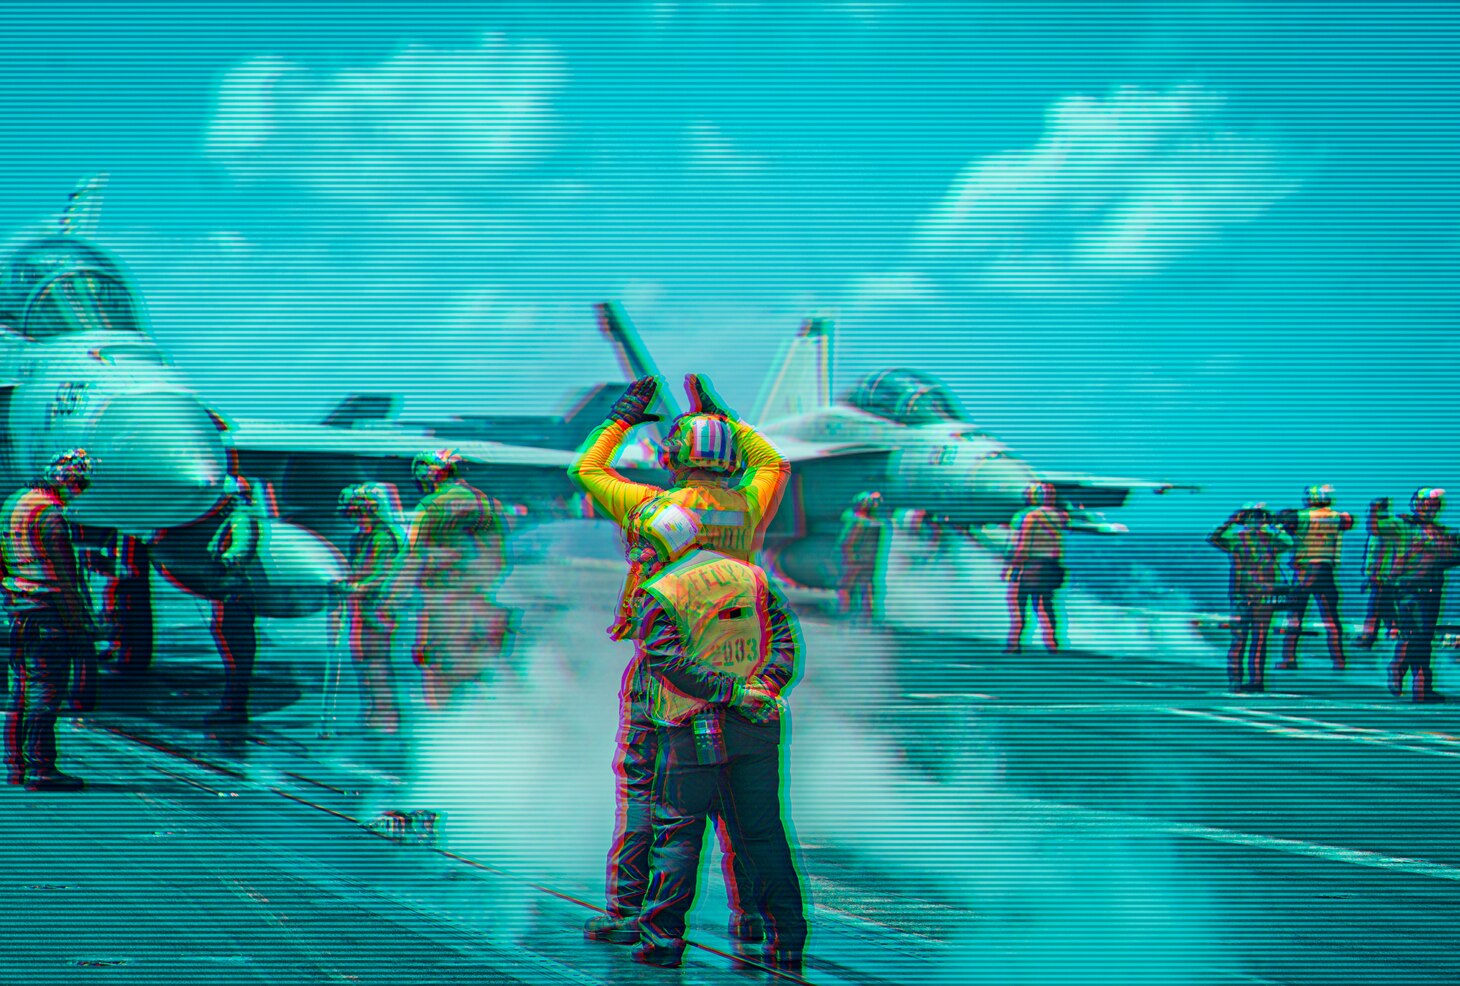 U.S. Navy Sailors prepare aircraft for flight operations on the flight deck of the aircraft carrier USS Nimitz (CVN 68). Nimitz is in U.S. 7th Fleet conducting routine operations. 7th Fleet is the U.S. Navy's largest forward-deployed numbered fleet, and routinely interacts and operates with allies and partners in preserving a free and open Indo-Pacific region.